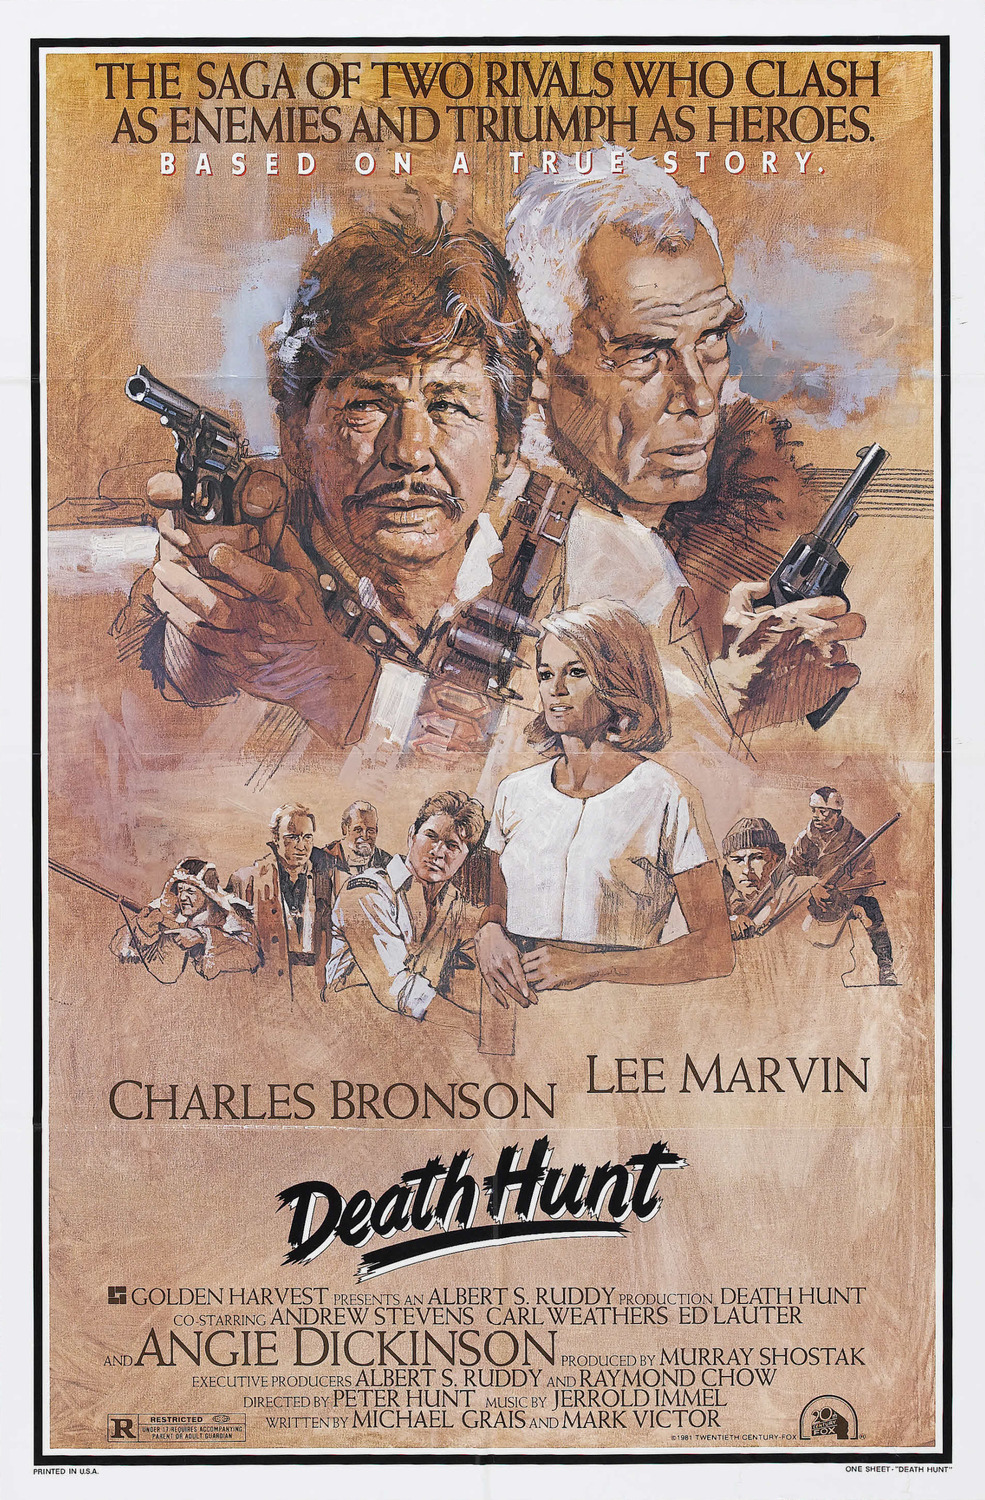 Extra Large Movie Poster Image for Death Hunt 